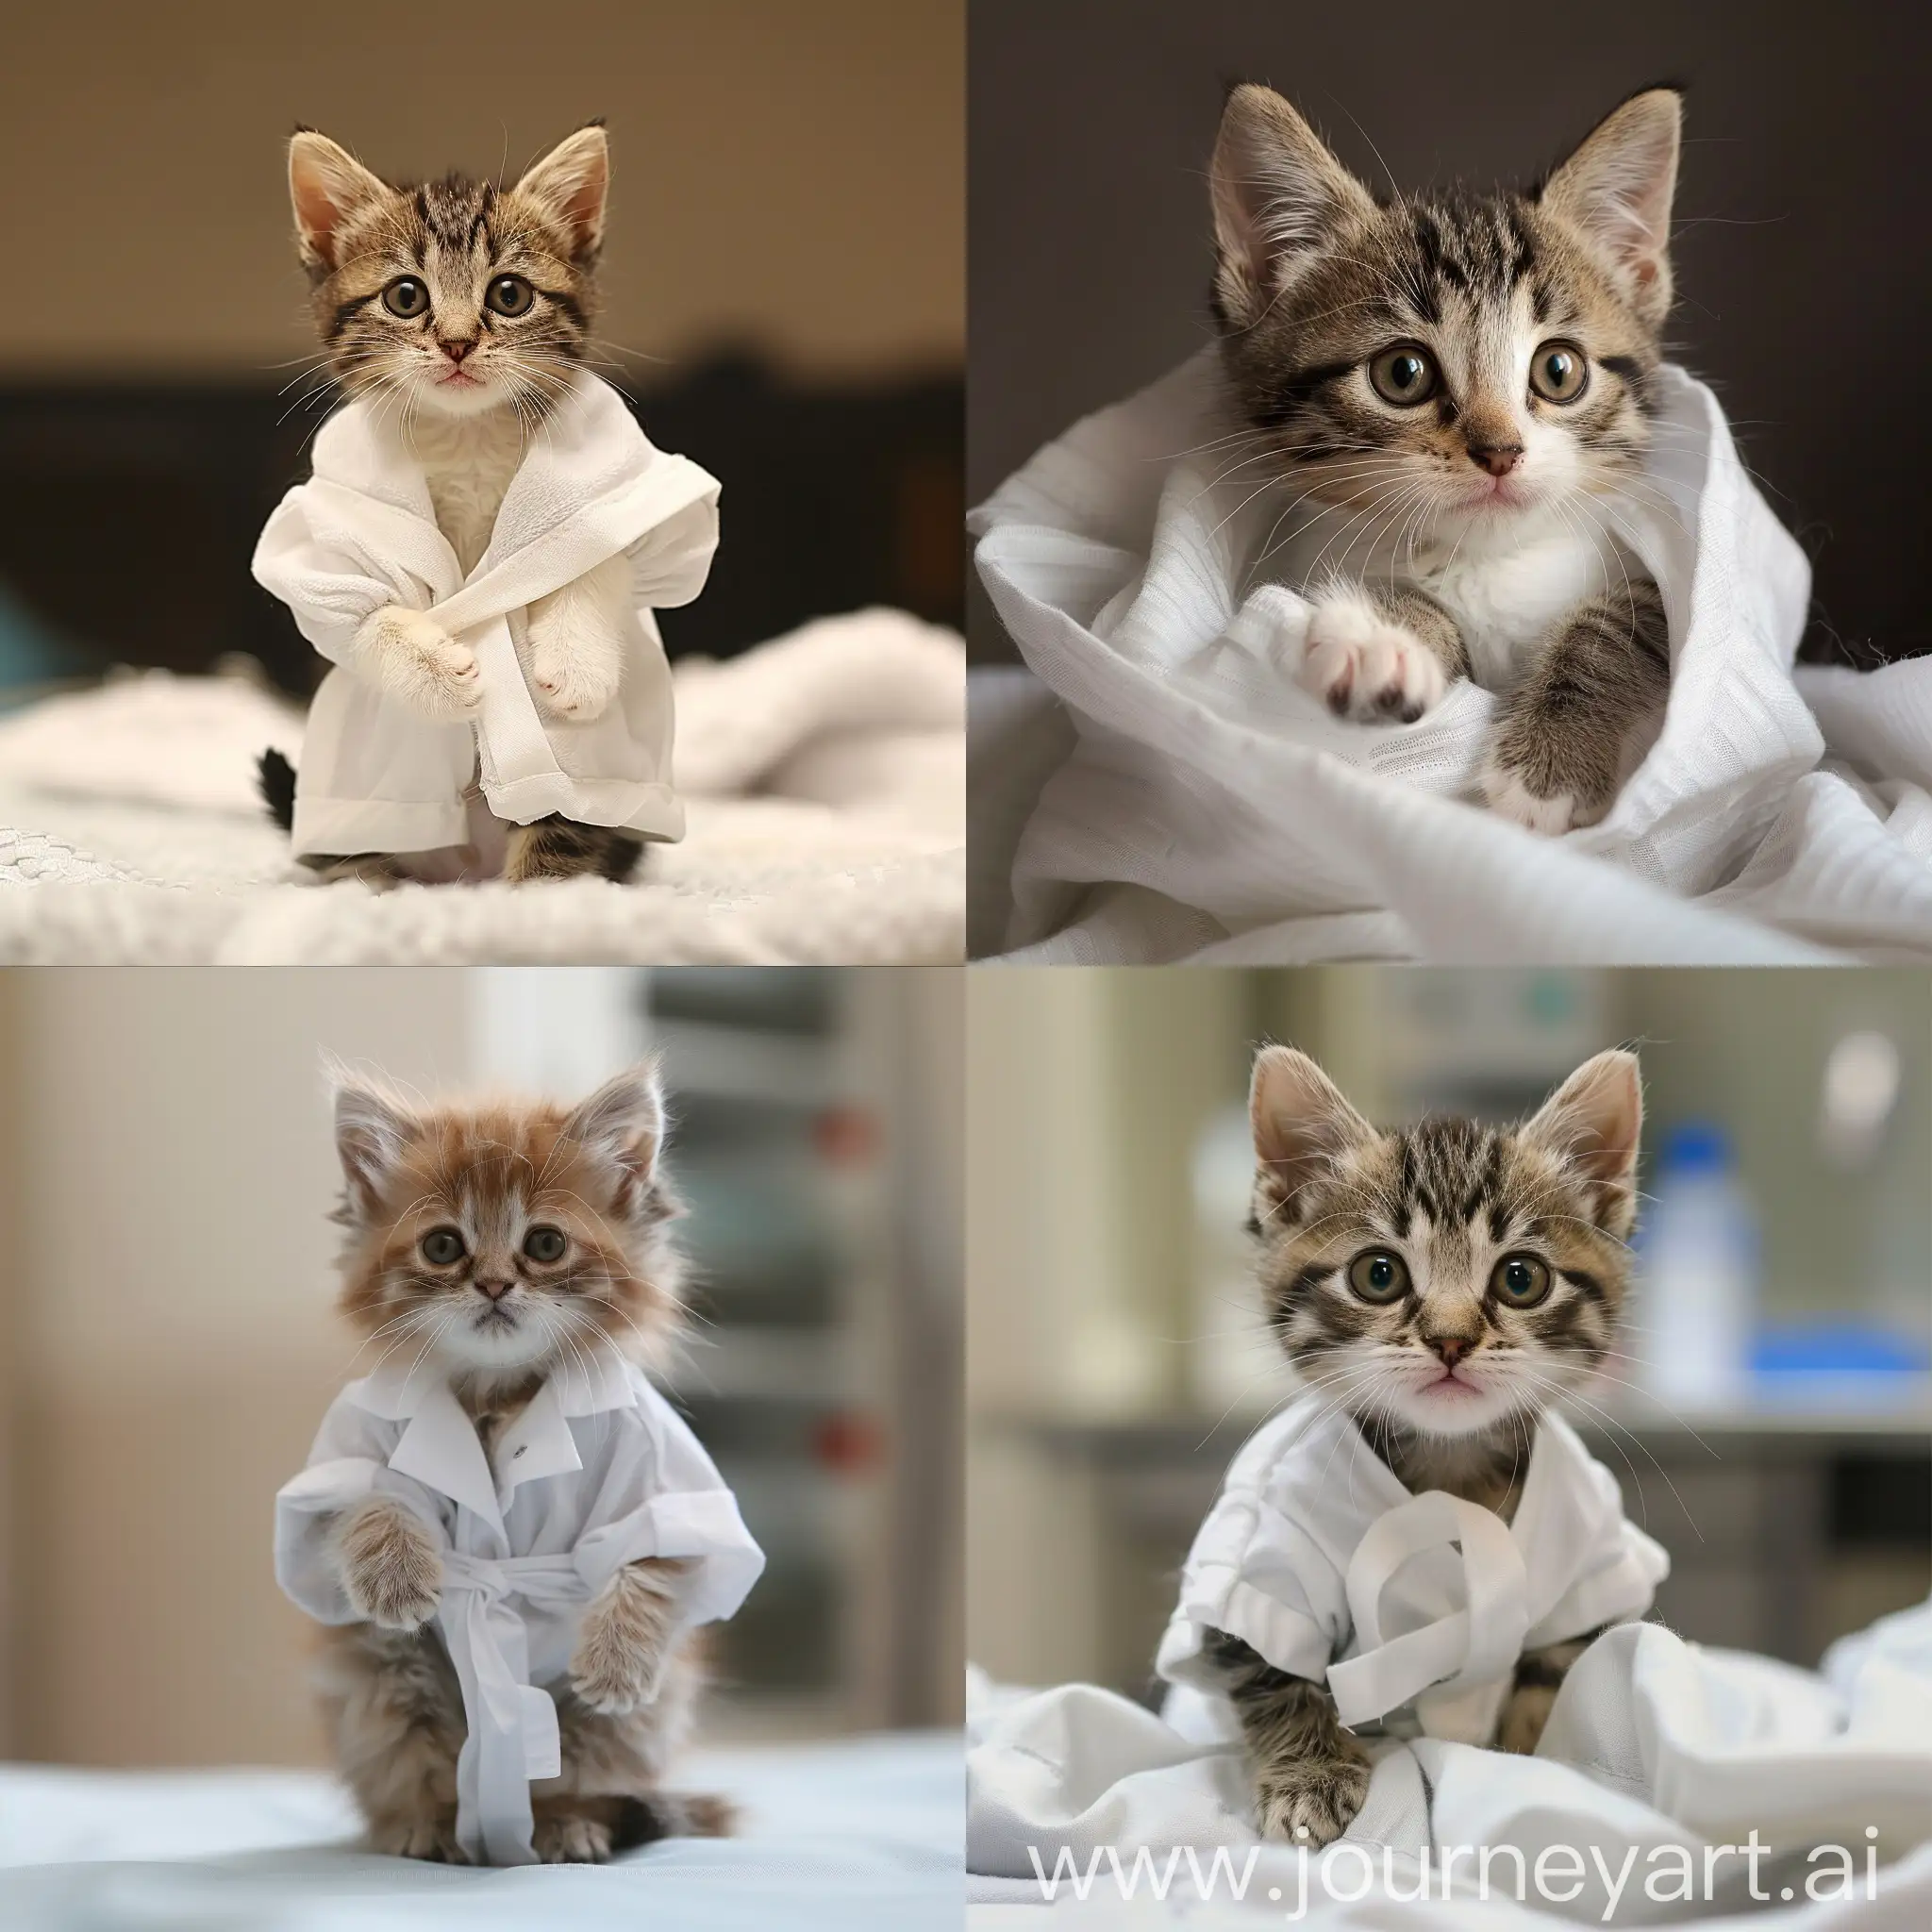 Adorable-Kitten-in-White-Medical-Gown-Cute-Animal-in-Doctors-Costume